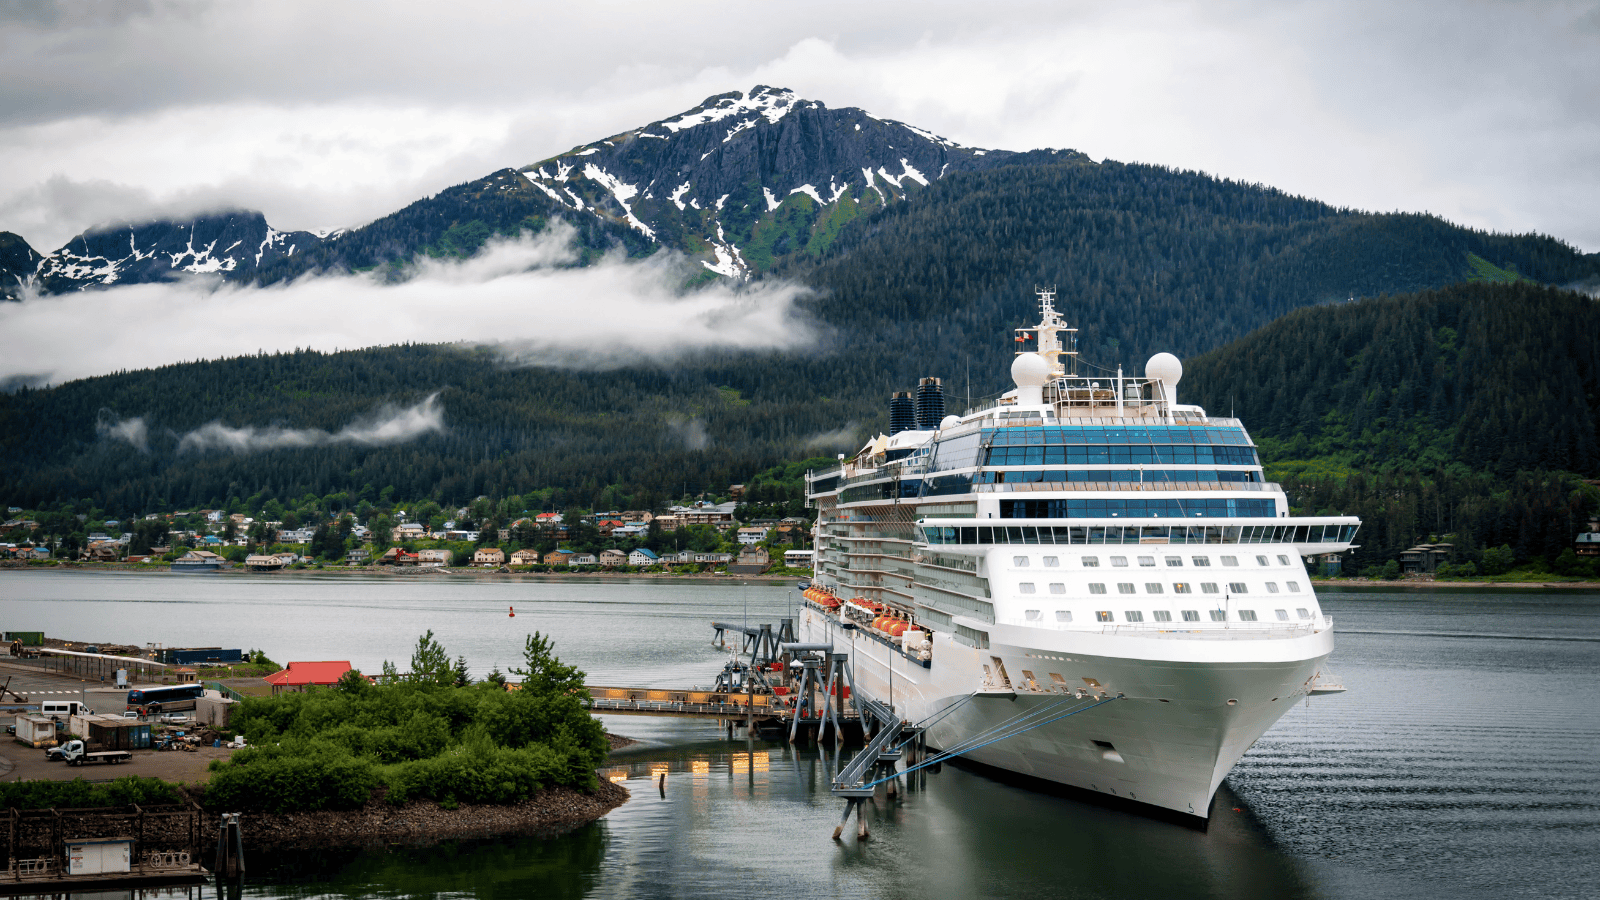 <p>Embark on a scenic nine-day journey through the Alaskan towns of Glacier Bay, Skagway, and Juneau with <a href="https://www.ncl.com/cruises/9-day-alaska-round-trip-seattle-glacier-bay-skagway-and-juneau-SUN9SEASITSGYJNUICYKTNVICSEA" rel="nofollow external noopener noreferrer">Norwegian Cruise Line</a>. From <a href="https://whatthefab.com/seattle-itinerary.html" rel="follow">Seattle</a>, the cruise heads north to Icy Strait Point, home to Alaska’s largest Native Tlingit community. </p><p>During their trip, passengers can zipline, pan for gold, and take a scenic rail tour. Norwegian Cruise Line has gone above and beyond to provide an exceptional Alaskan getaway. </p>